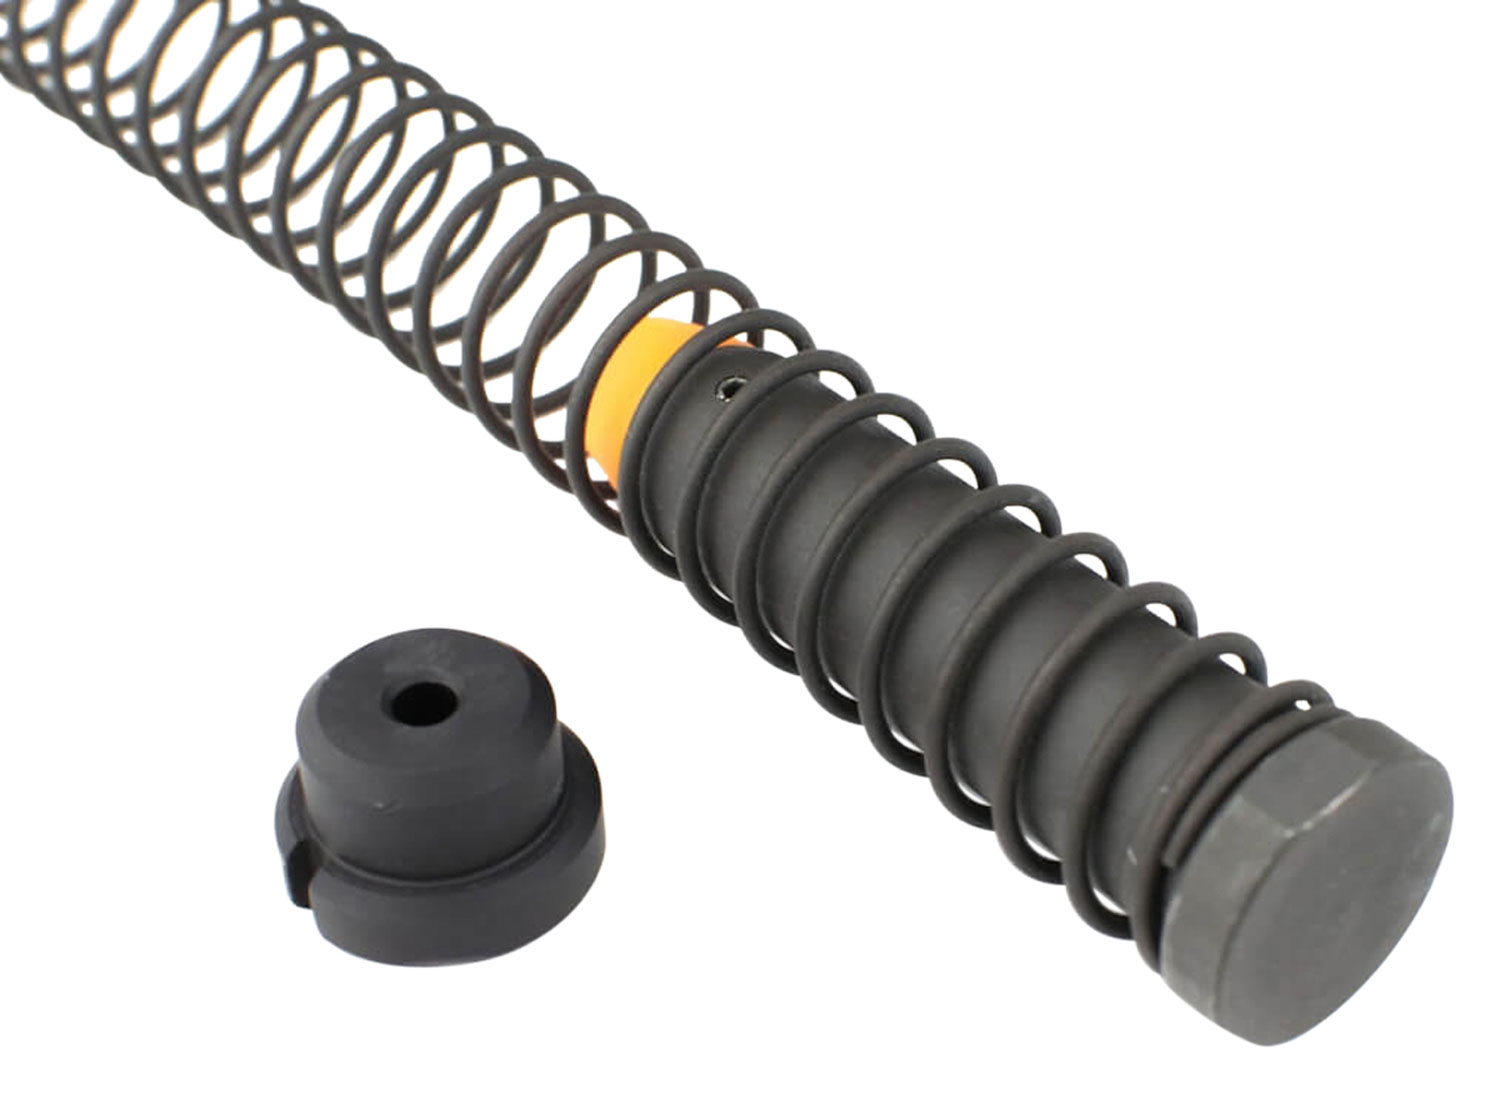 ANGSTADT BUFFER KIT 9MM 5.4OZ WITH SPRING AND SPACER